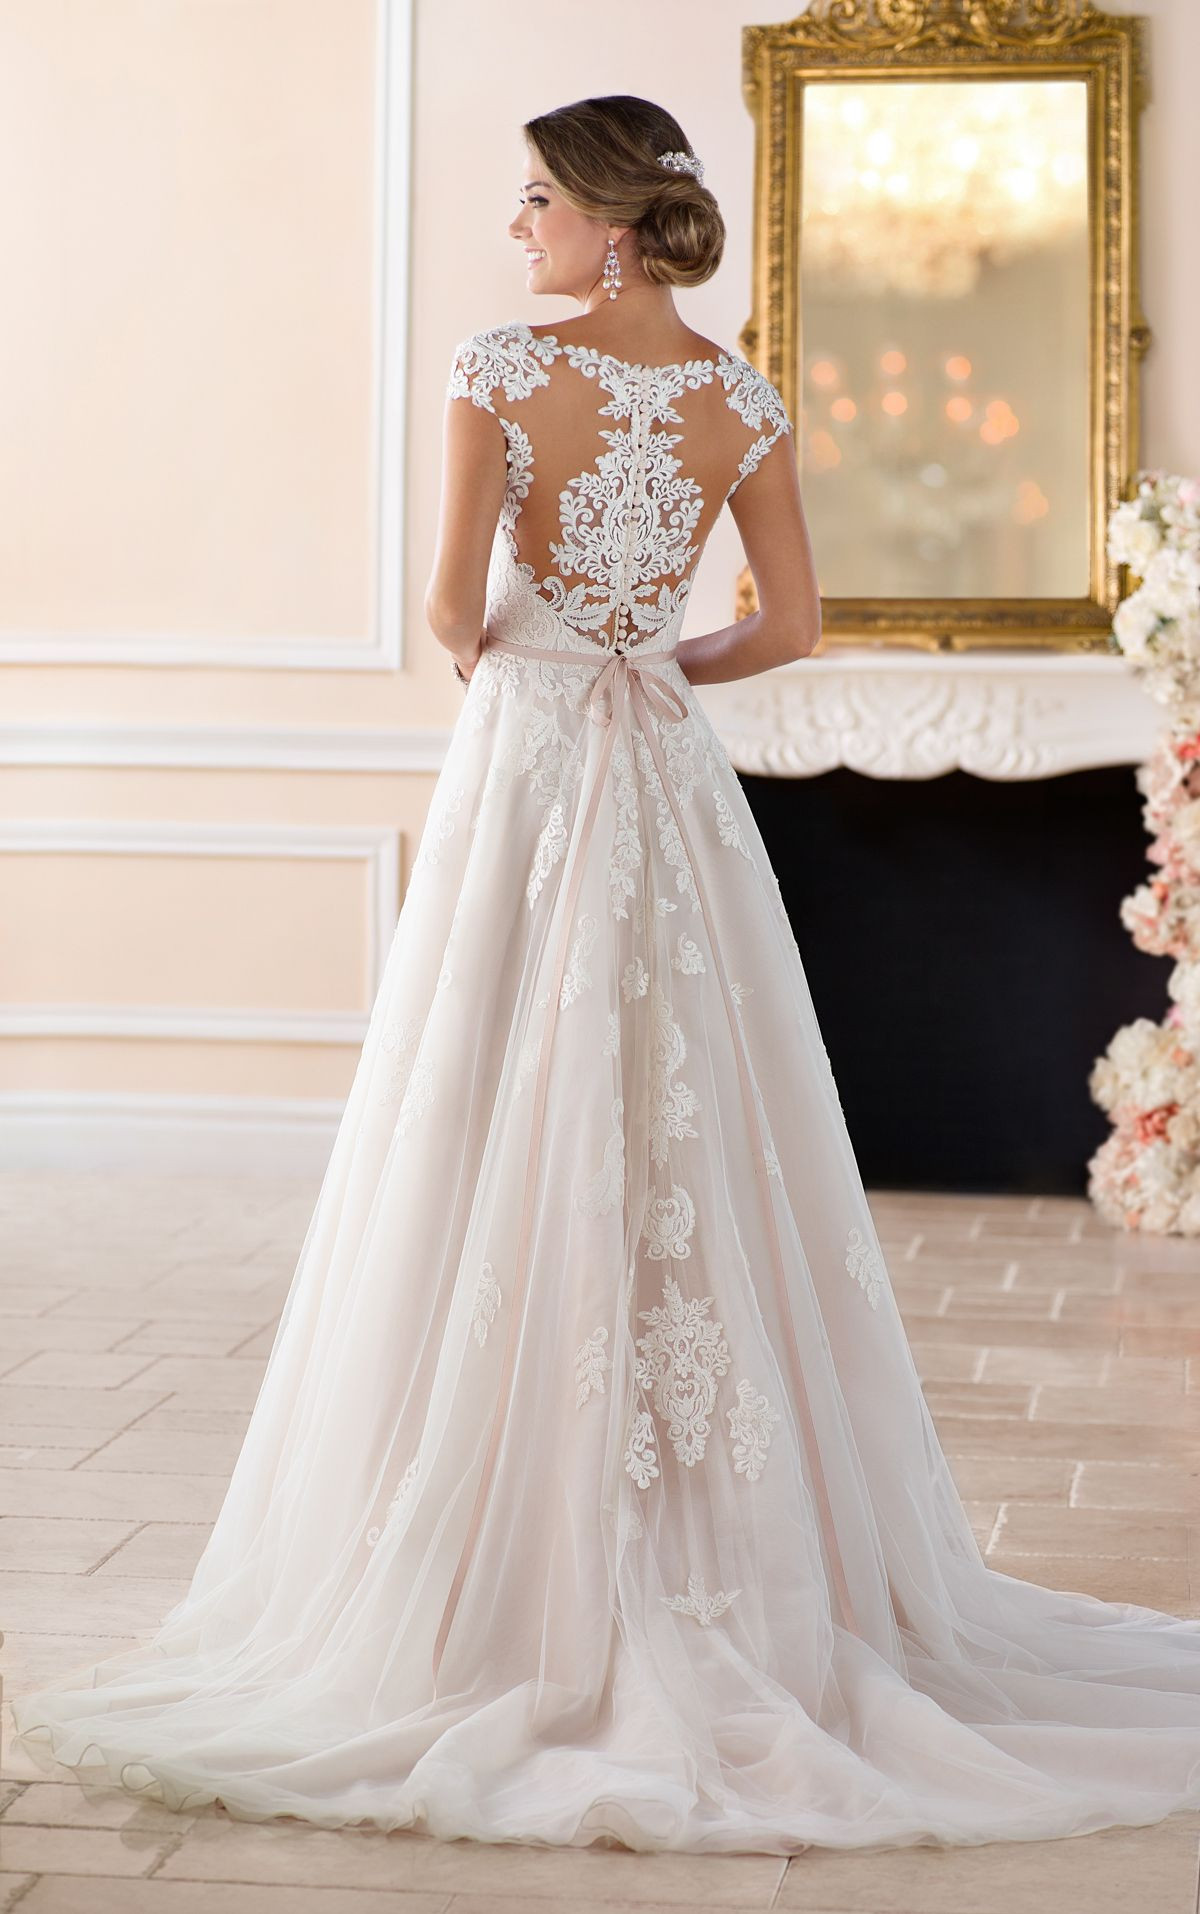 Wedding Gowns With Cap Sleeves
 Romantic Cap Sleeve Wedding Dress With Cameo Back in 2019